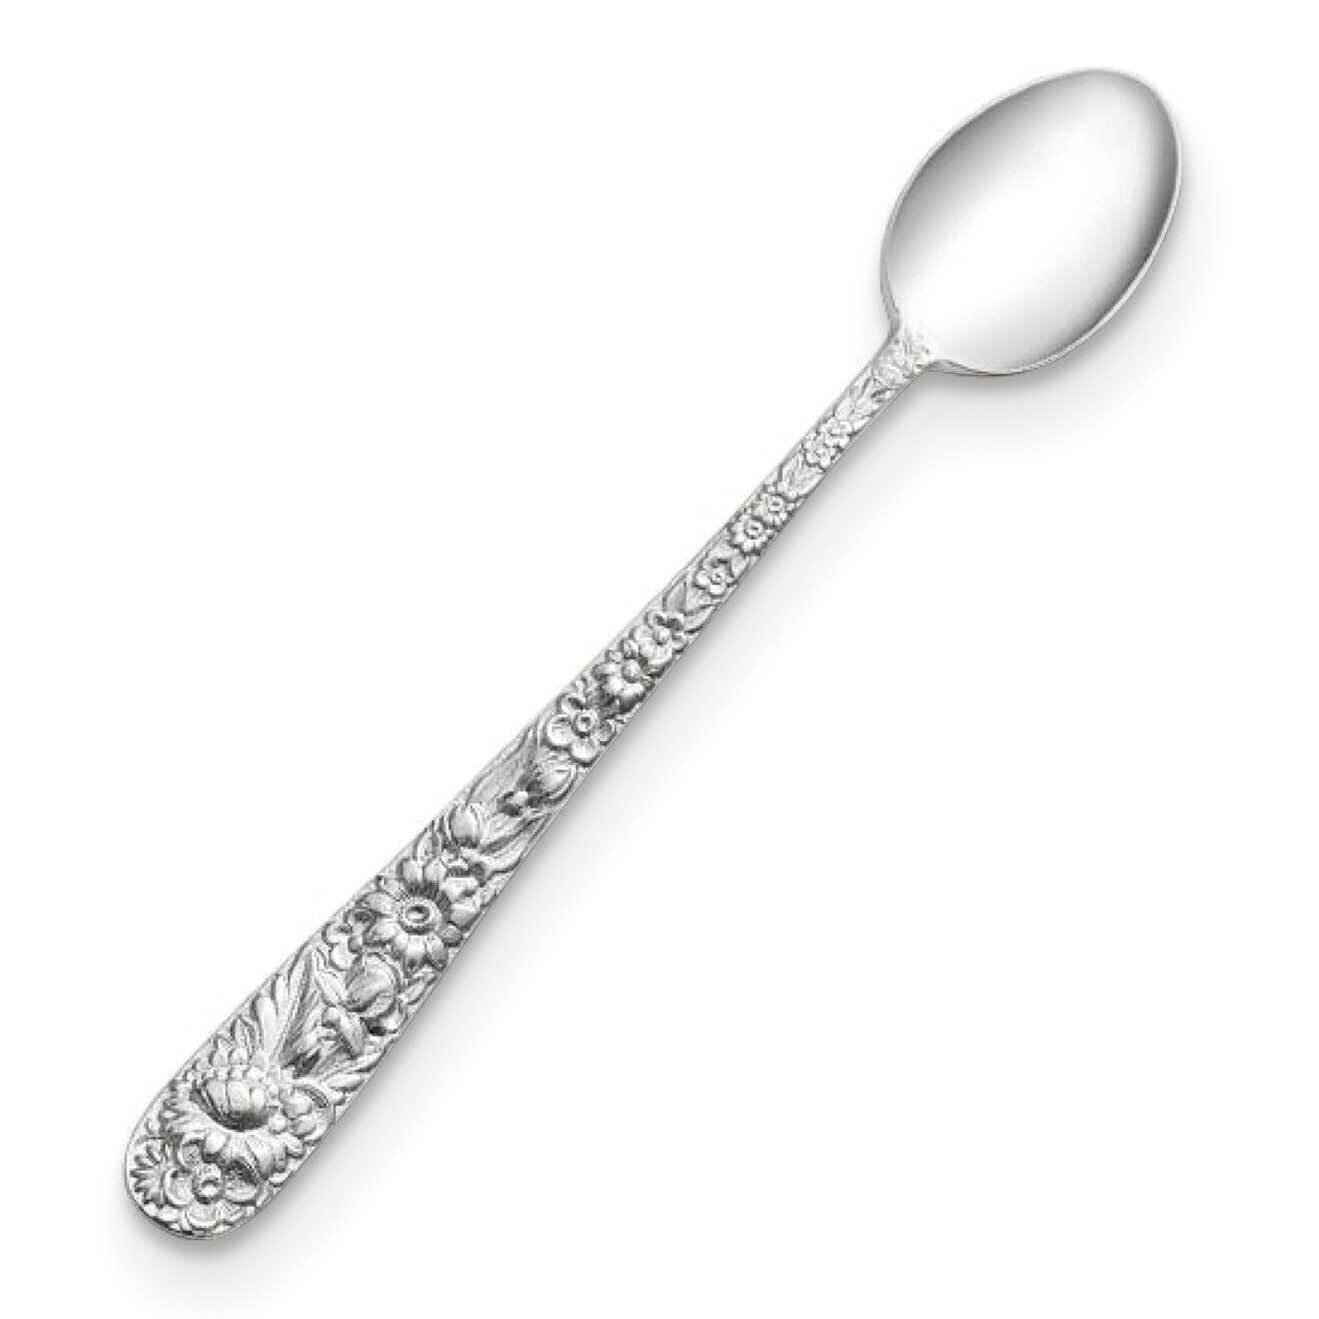 Kirk Stieff Repousse Sterling Silver Infant Feeding Spoon GM21974